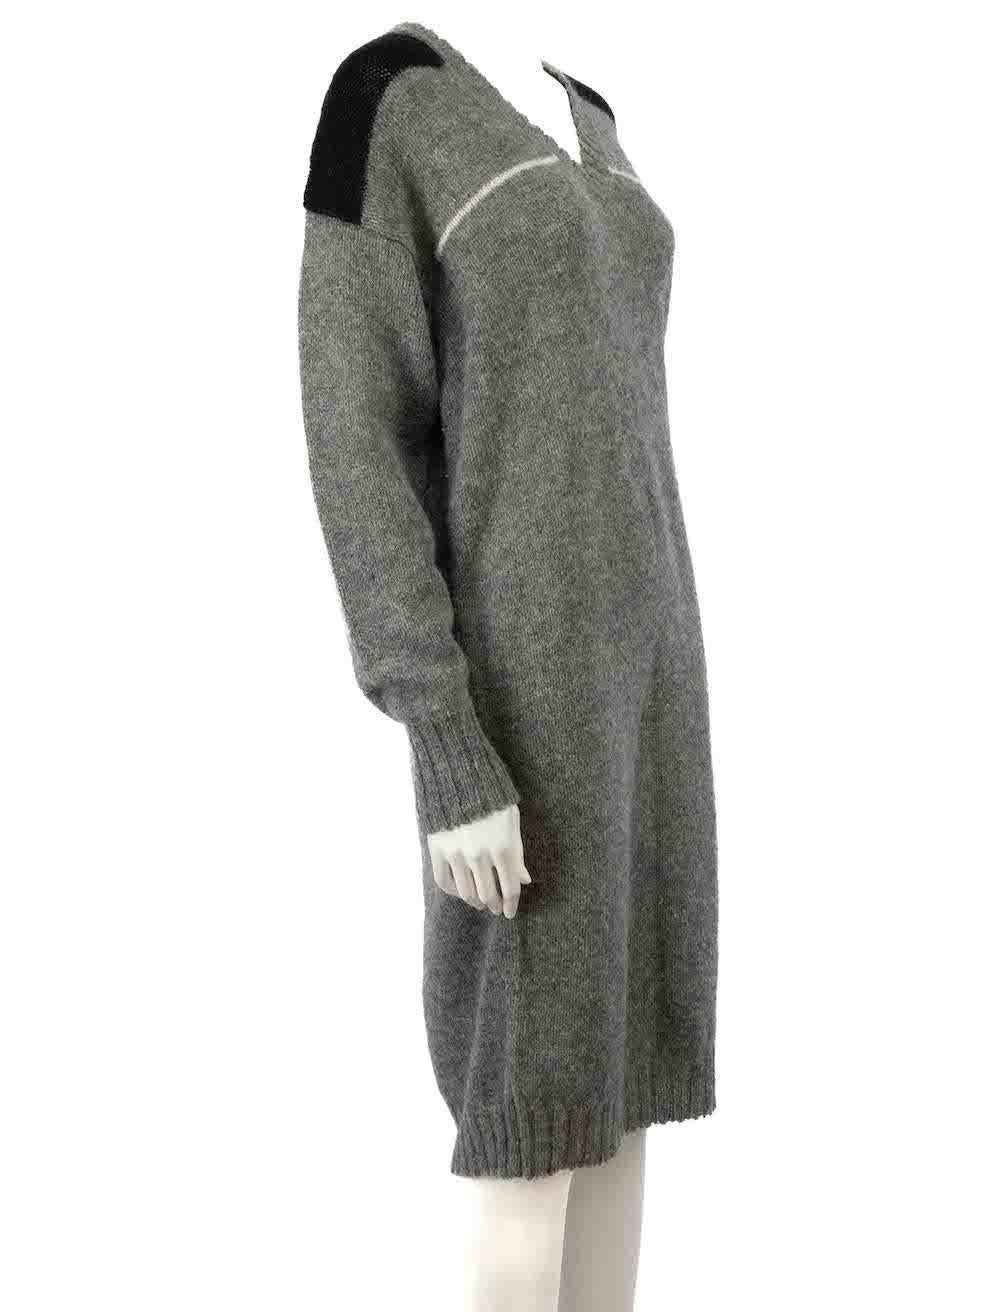 CONDITION is Very good. Minimal wear to dress is evident. Minimal wear to the embroidered logo with discolouration on this used Prada designer resale item.
 
 Details
 Grey
 Wool
 Sweater dress
 Long sleeves
 V neckline
 Knitted and stretchy
 Logo